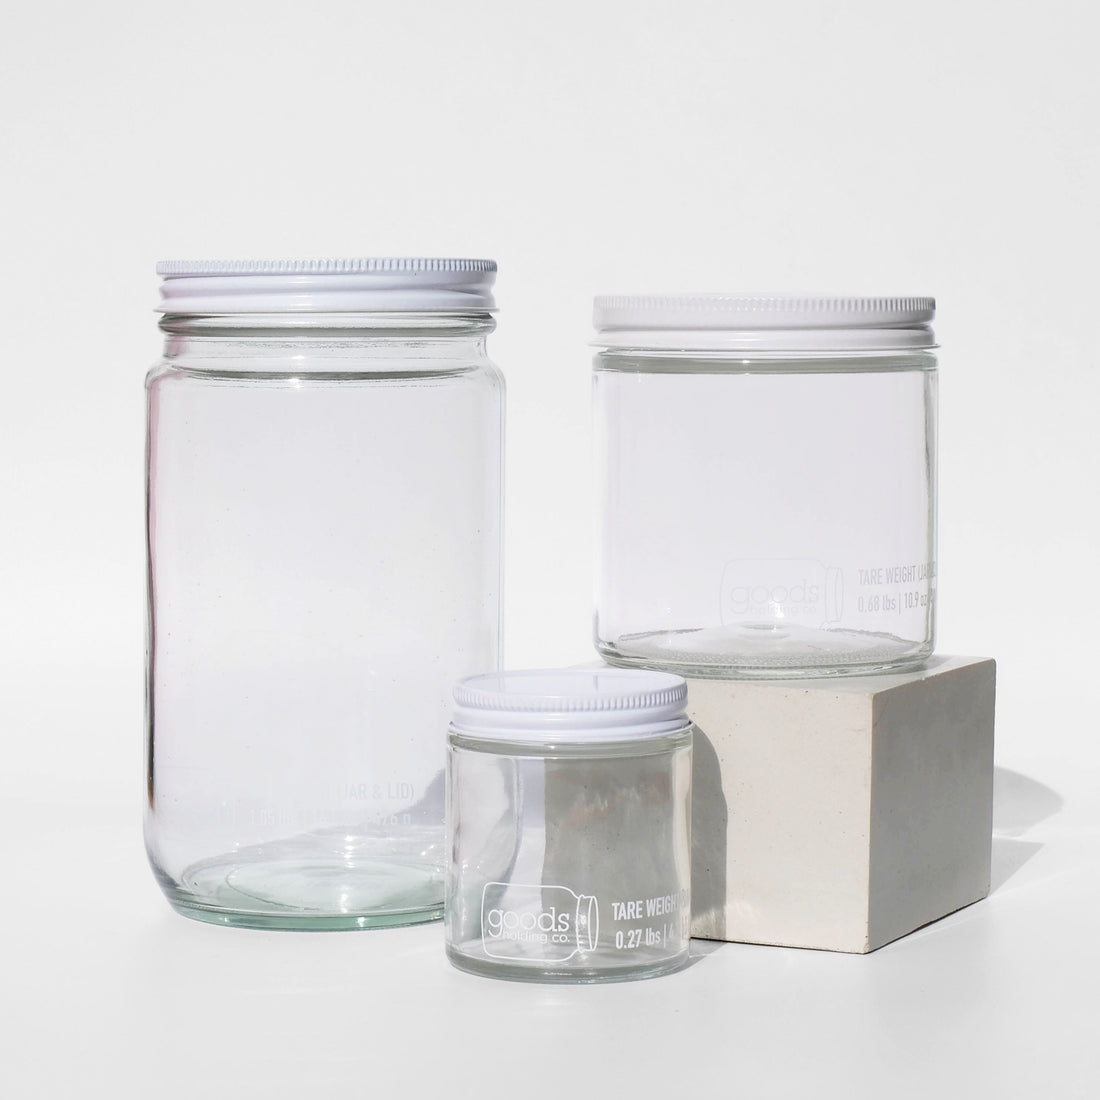 Glass Jars with Tare Weights in Various Sizes